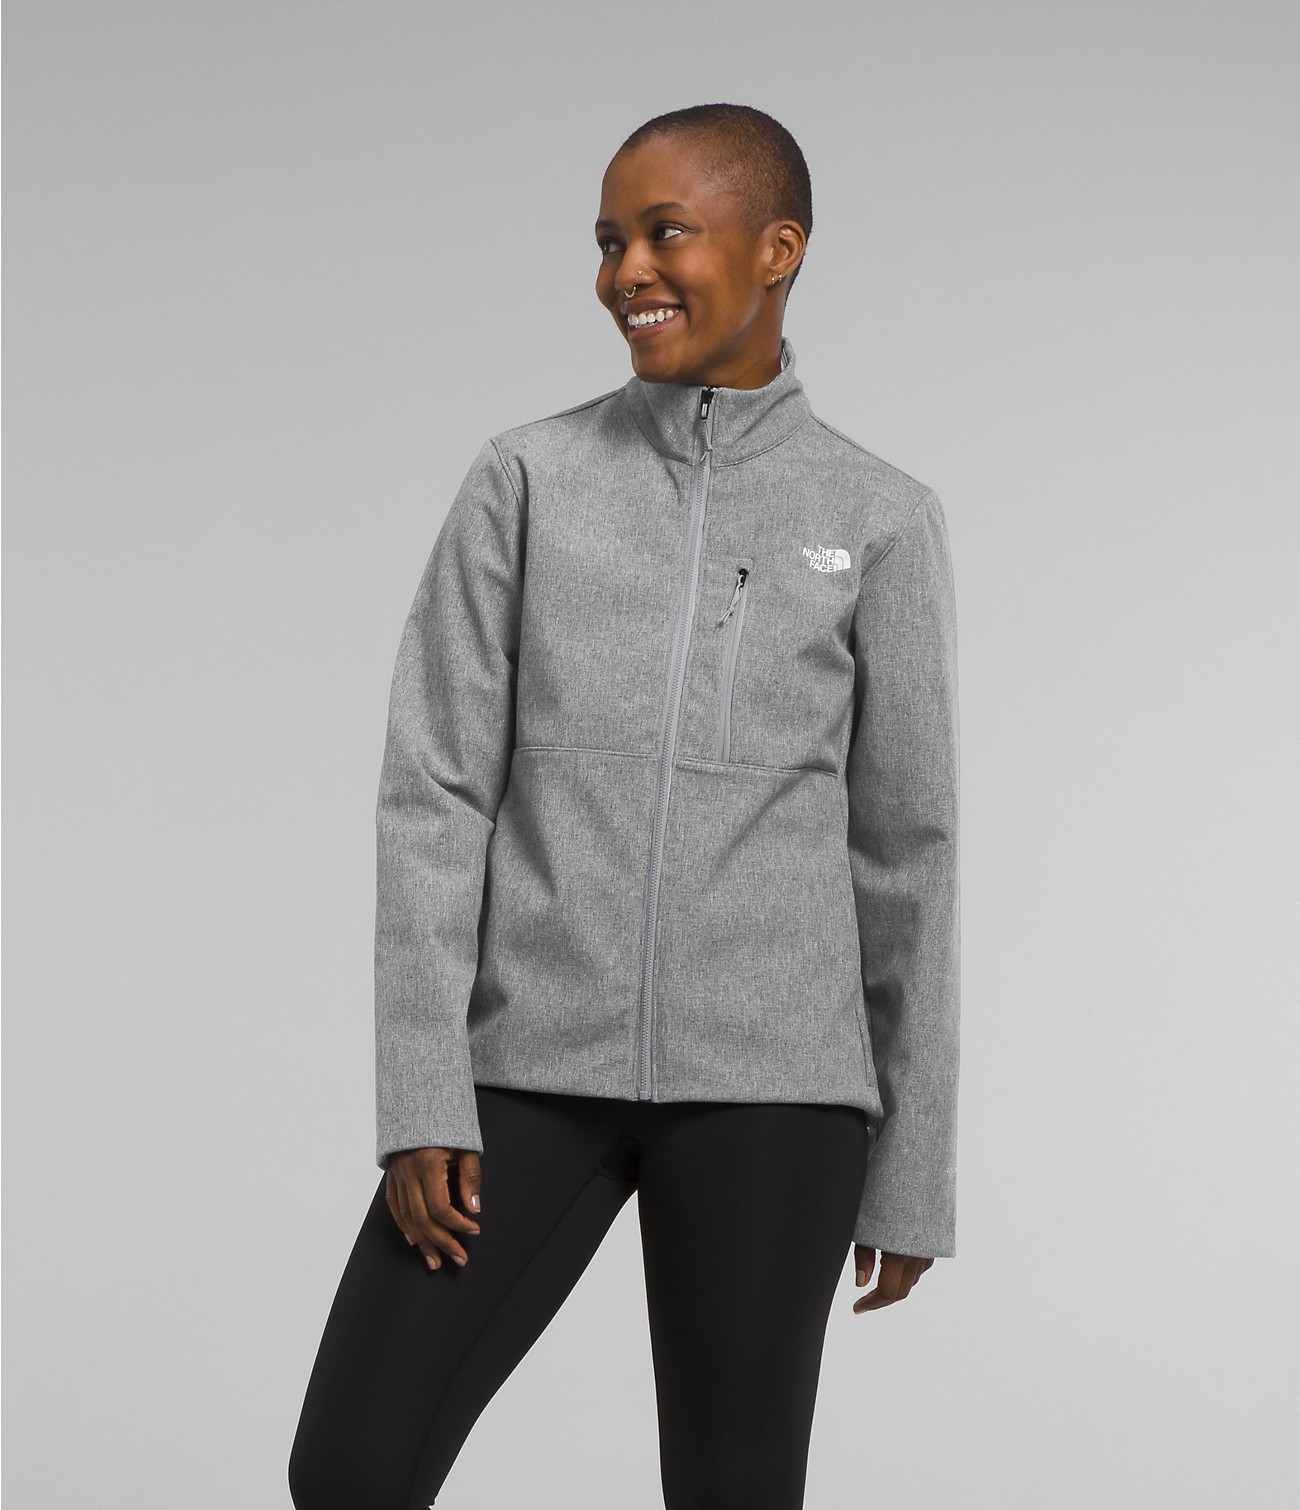 Women’s Apex Bionic 3 Jacket | The North Face